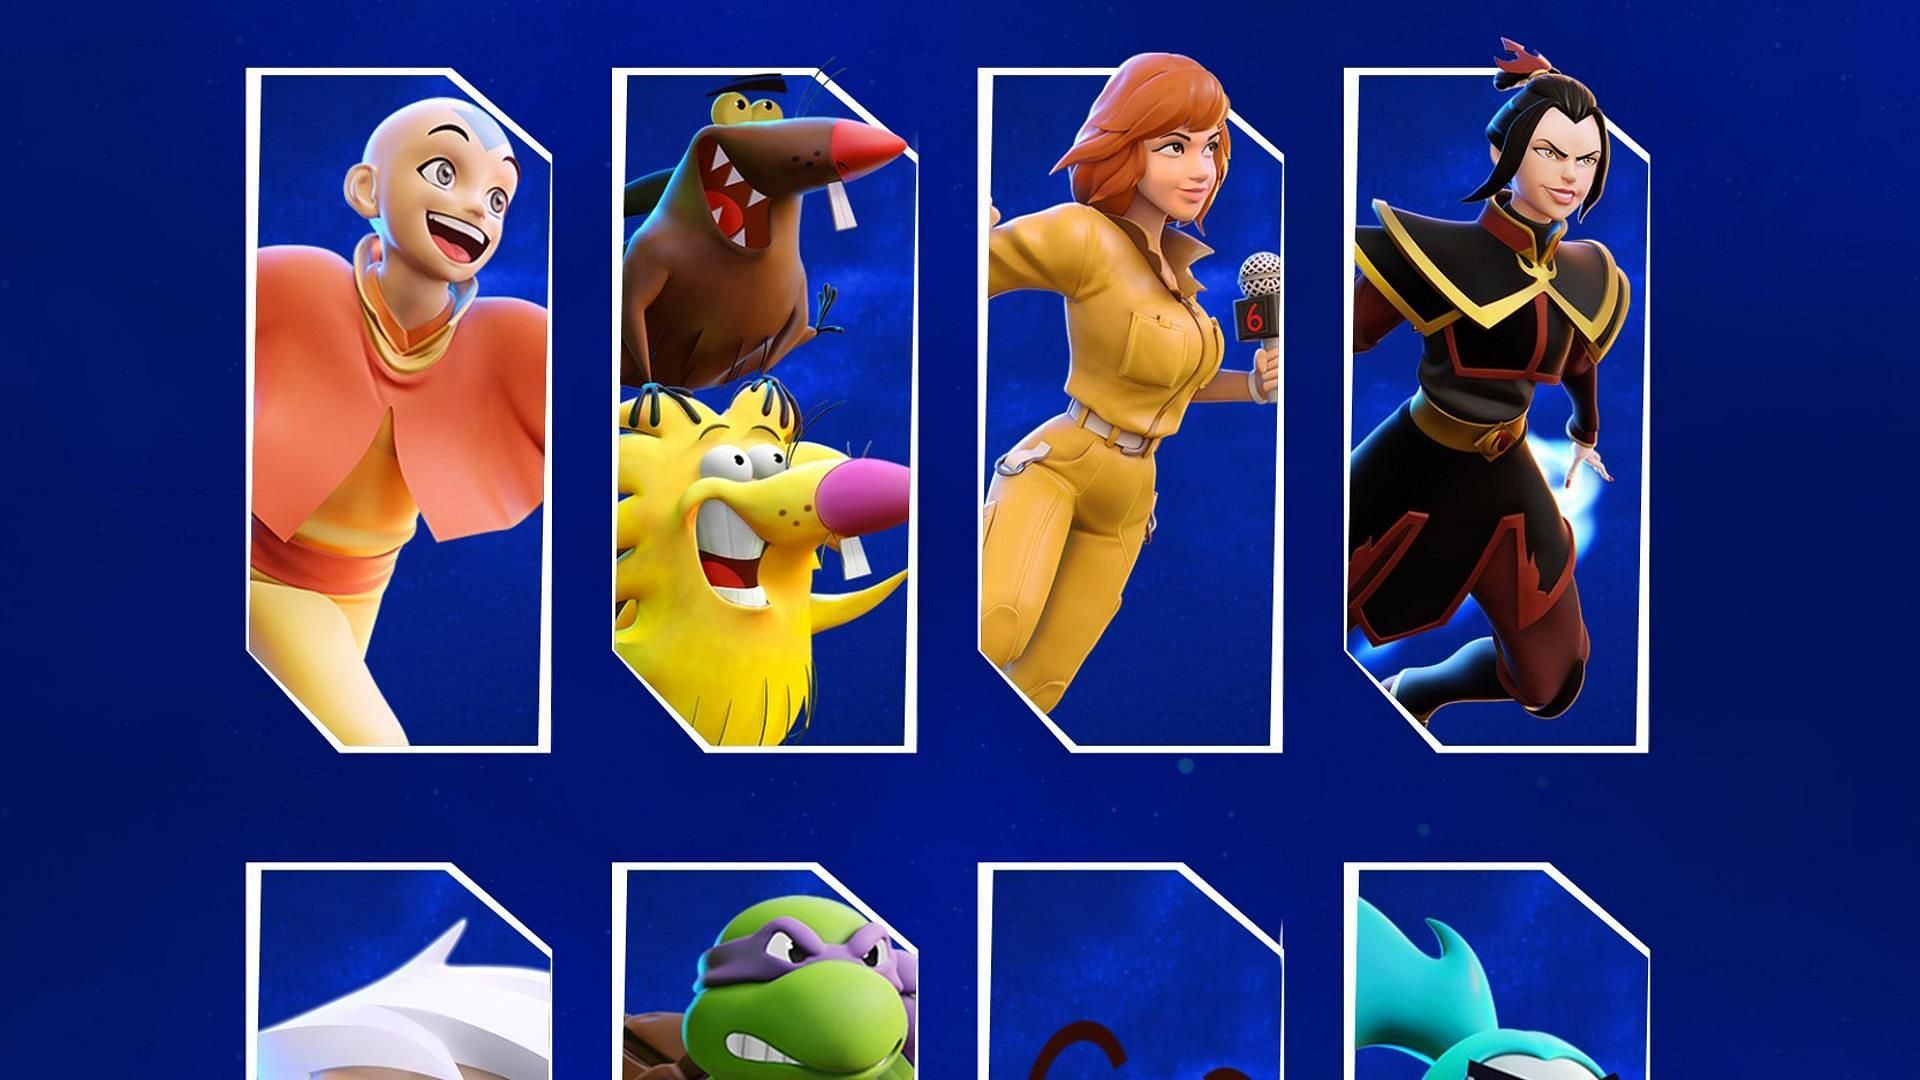 All-Star Brawl 2 has a wide range of characters available (Image via Nickelodeon)